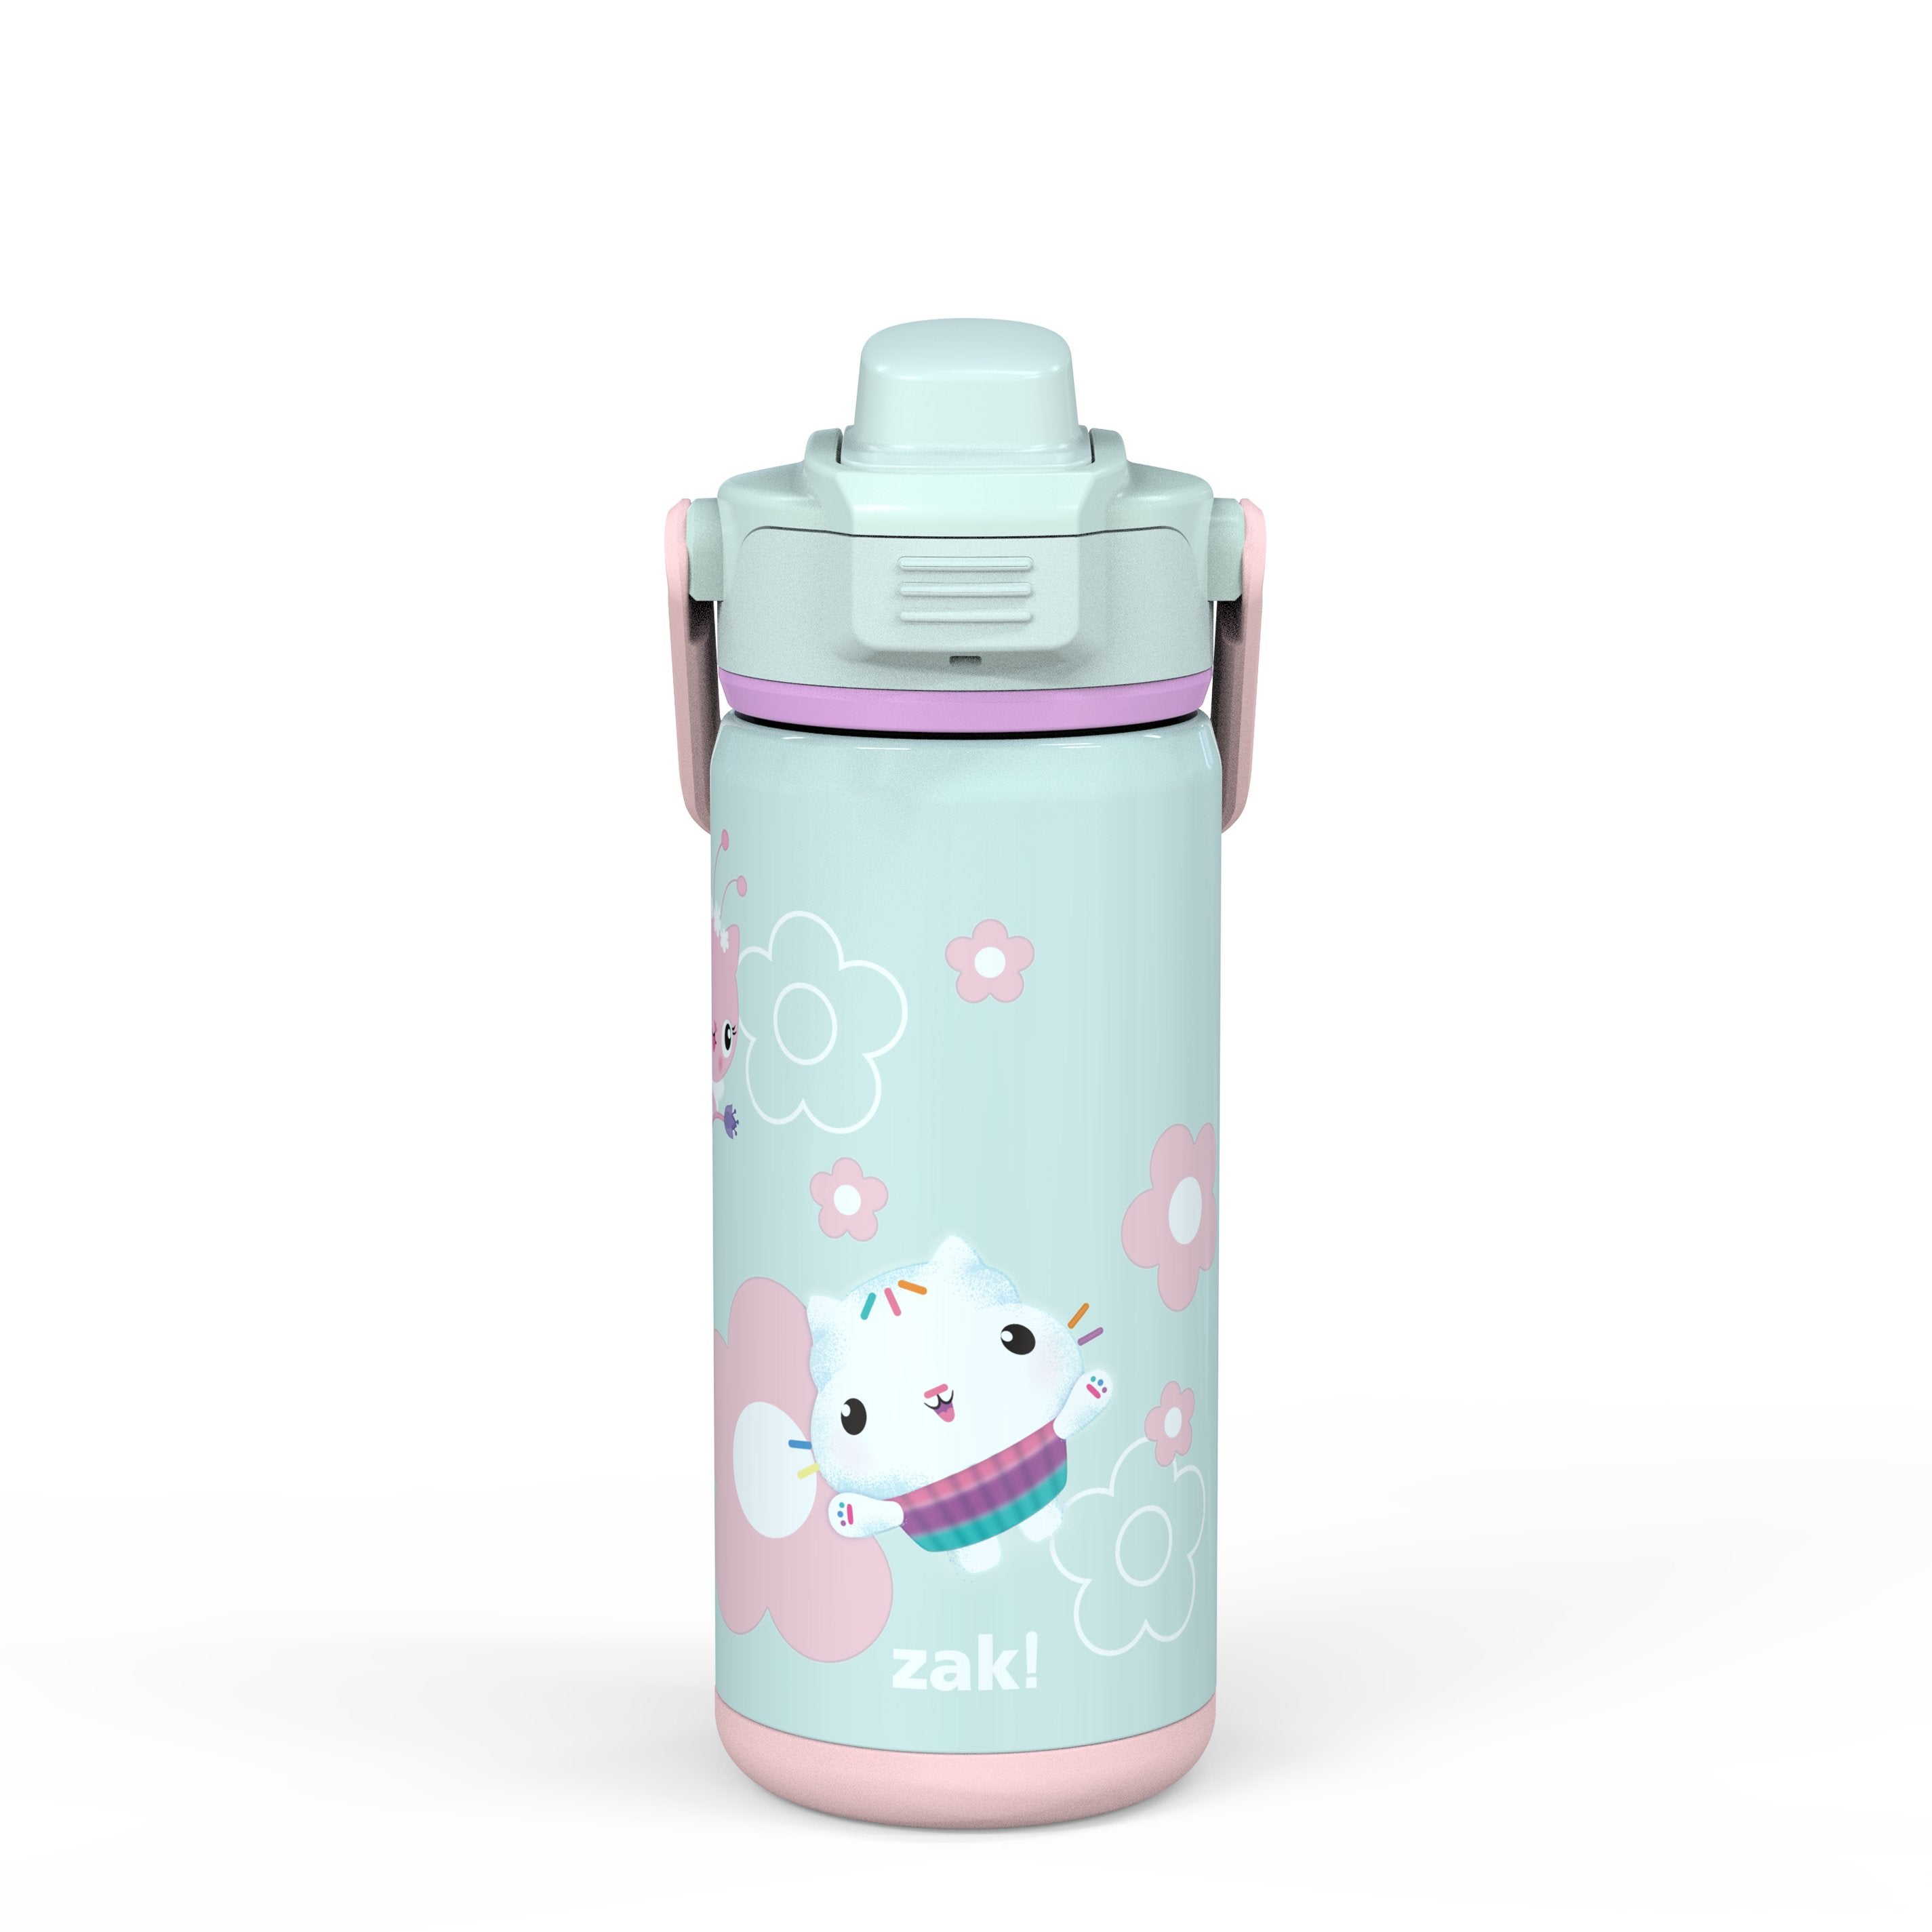 Beacon Stainless Steel Insulated Kids Water Bottle with Covered Spout - Unicorn, 14 Ounces